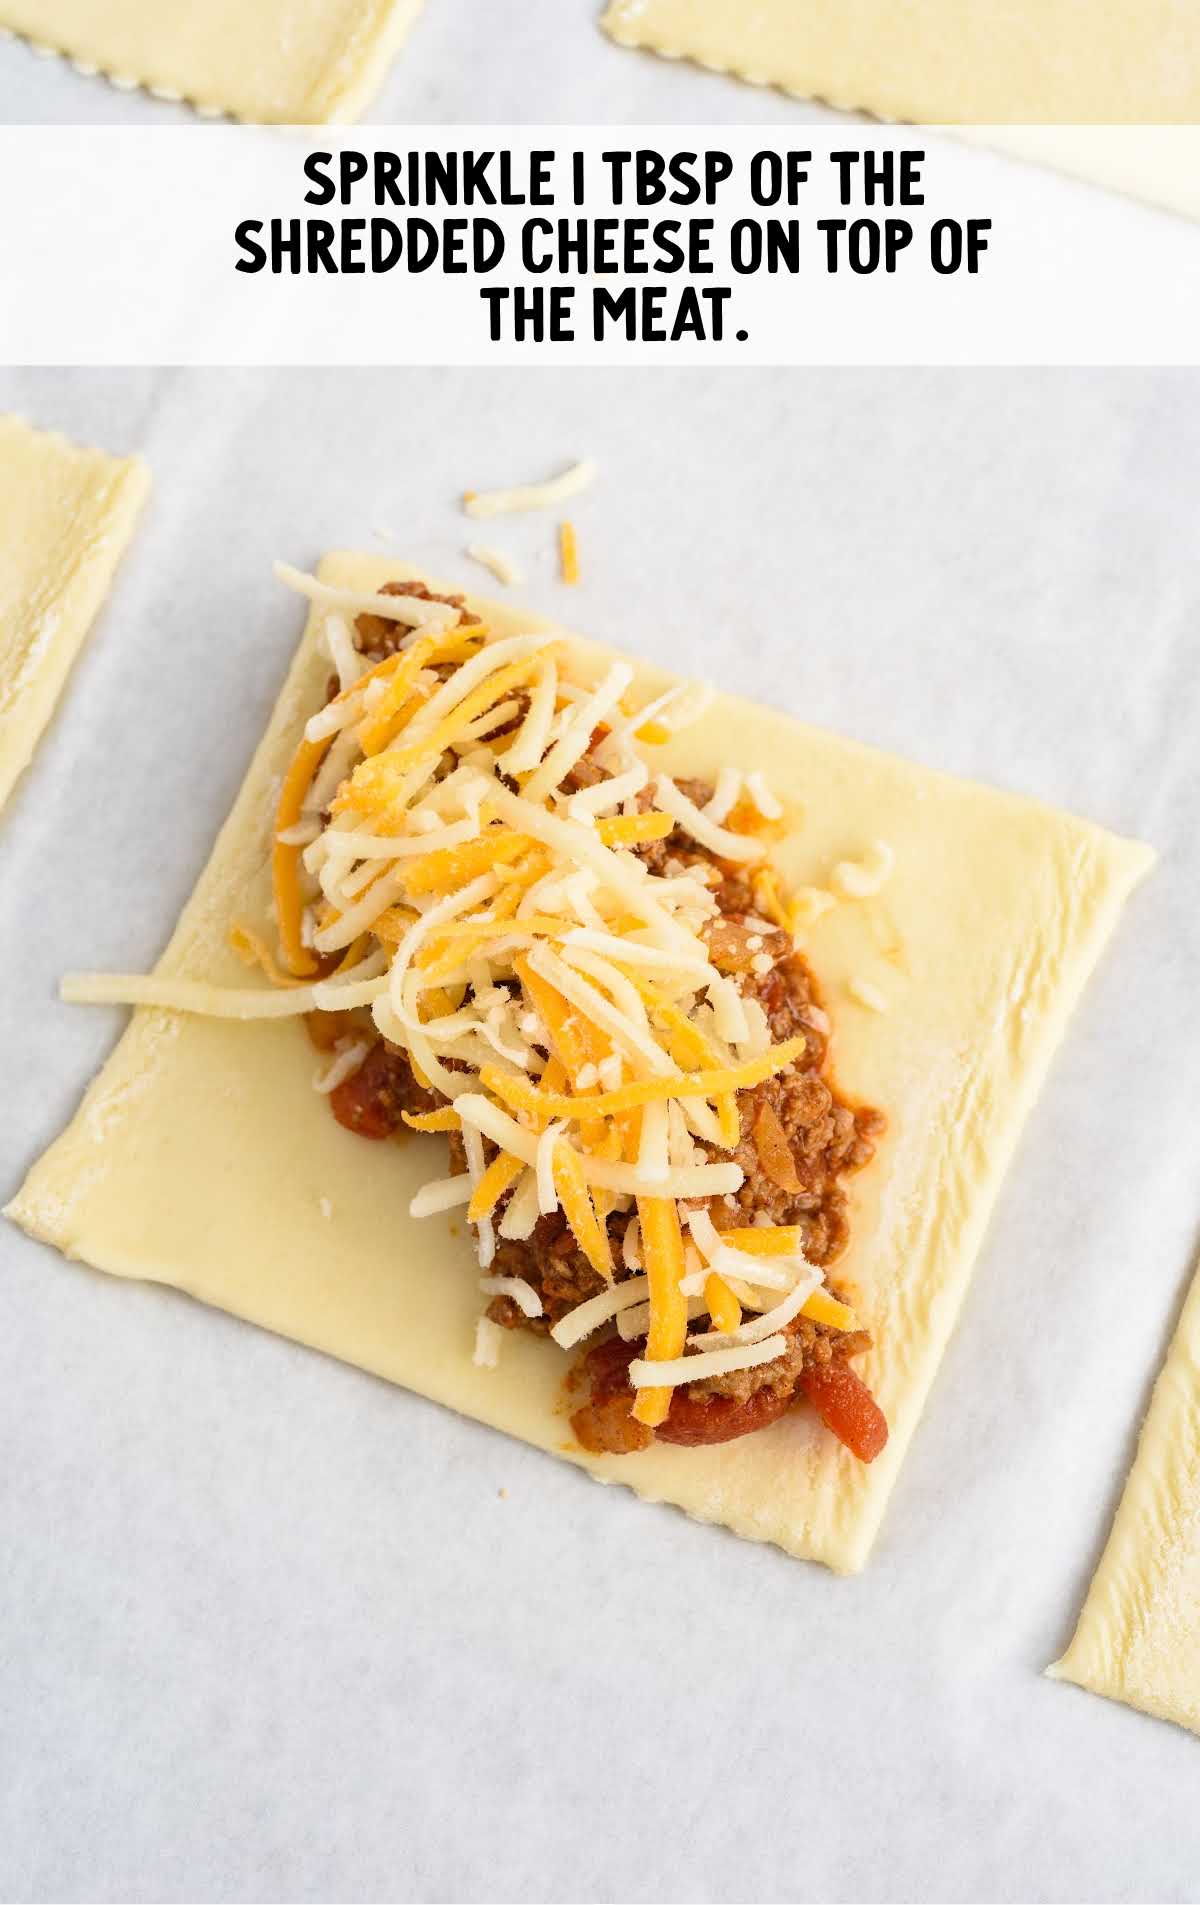 shredded cheese sprinkled on top of the meat